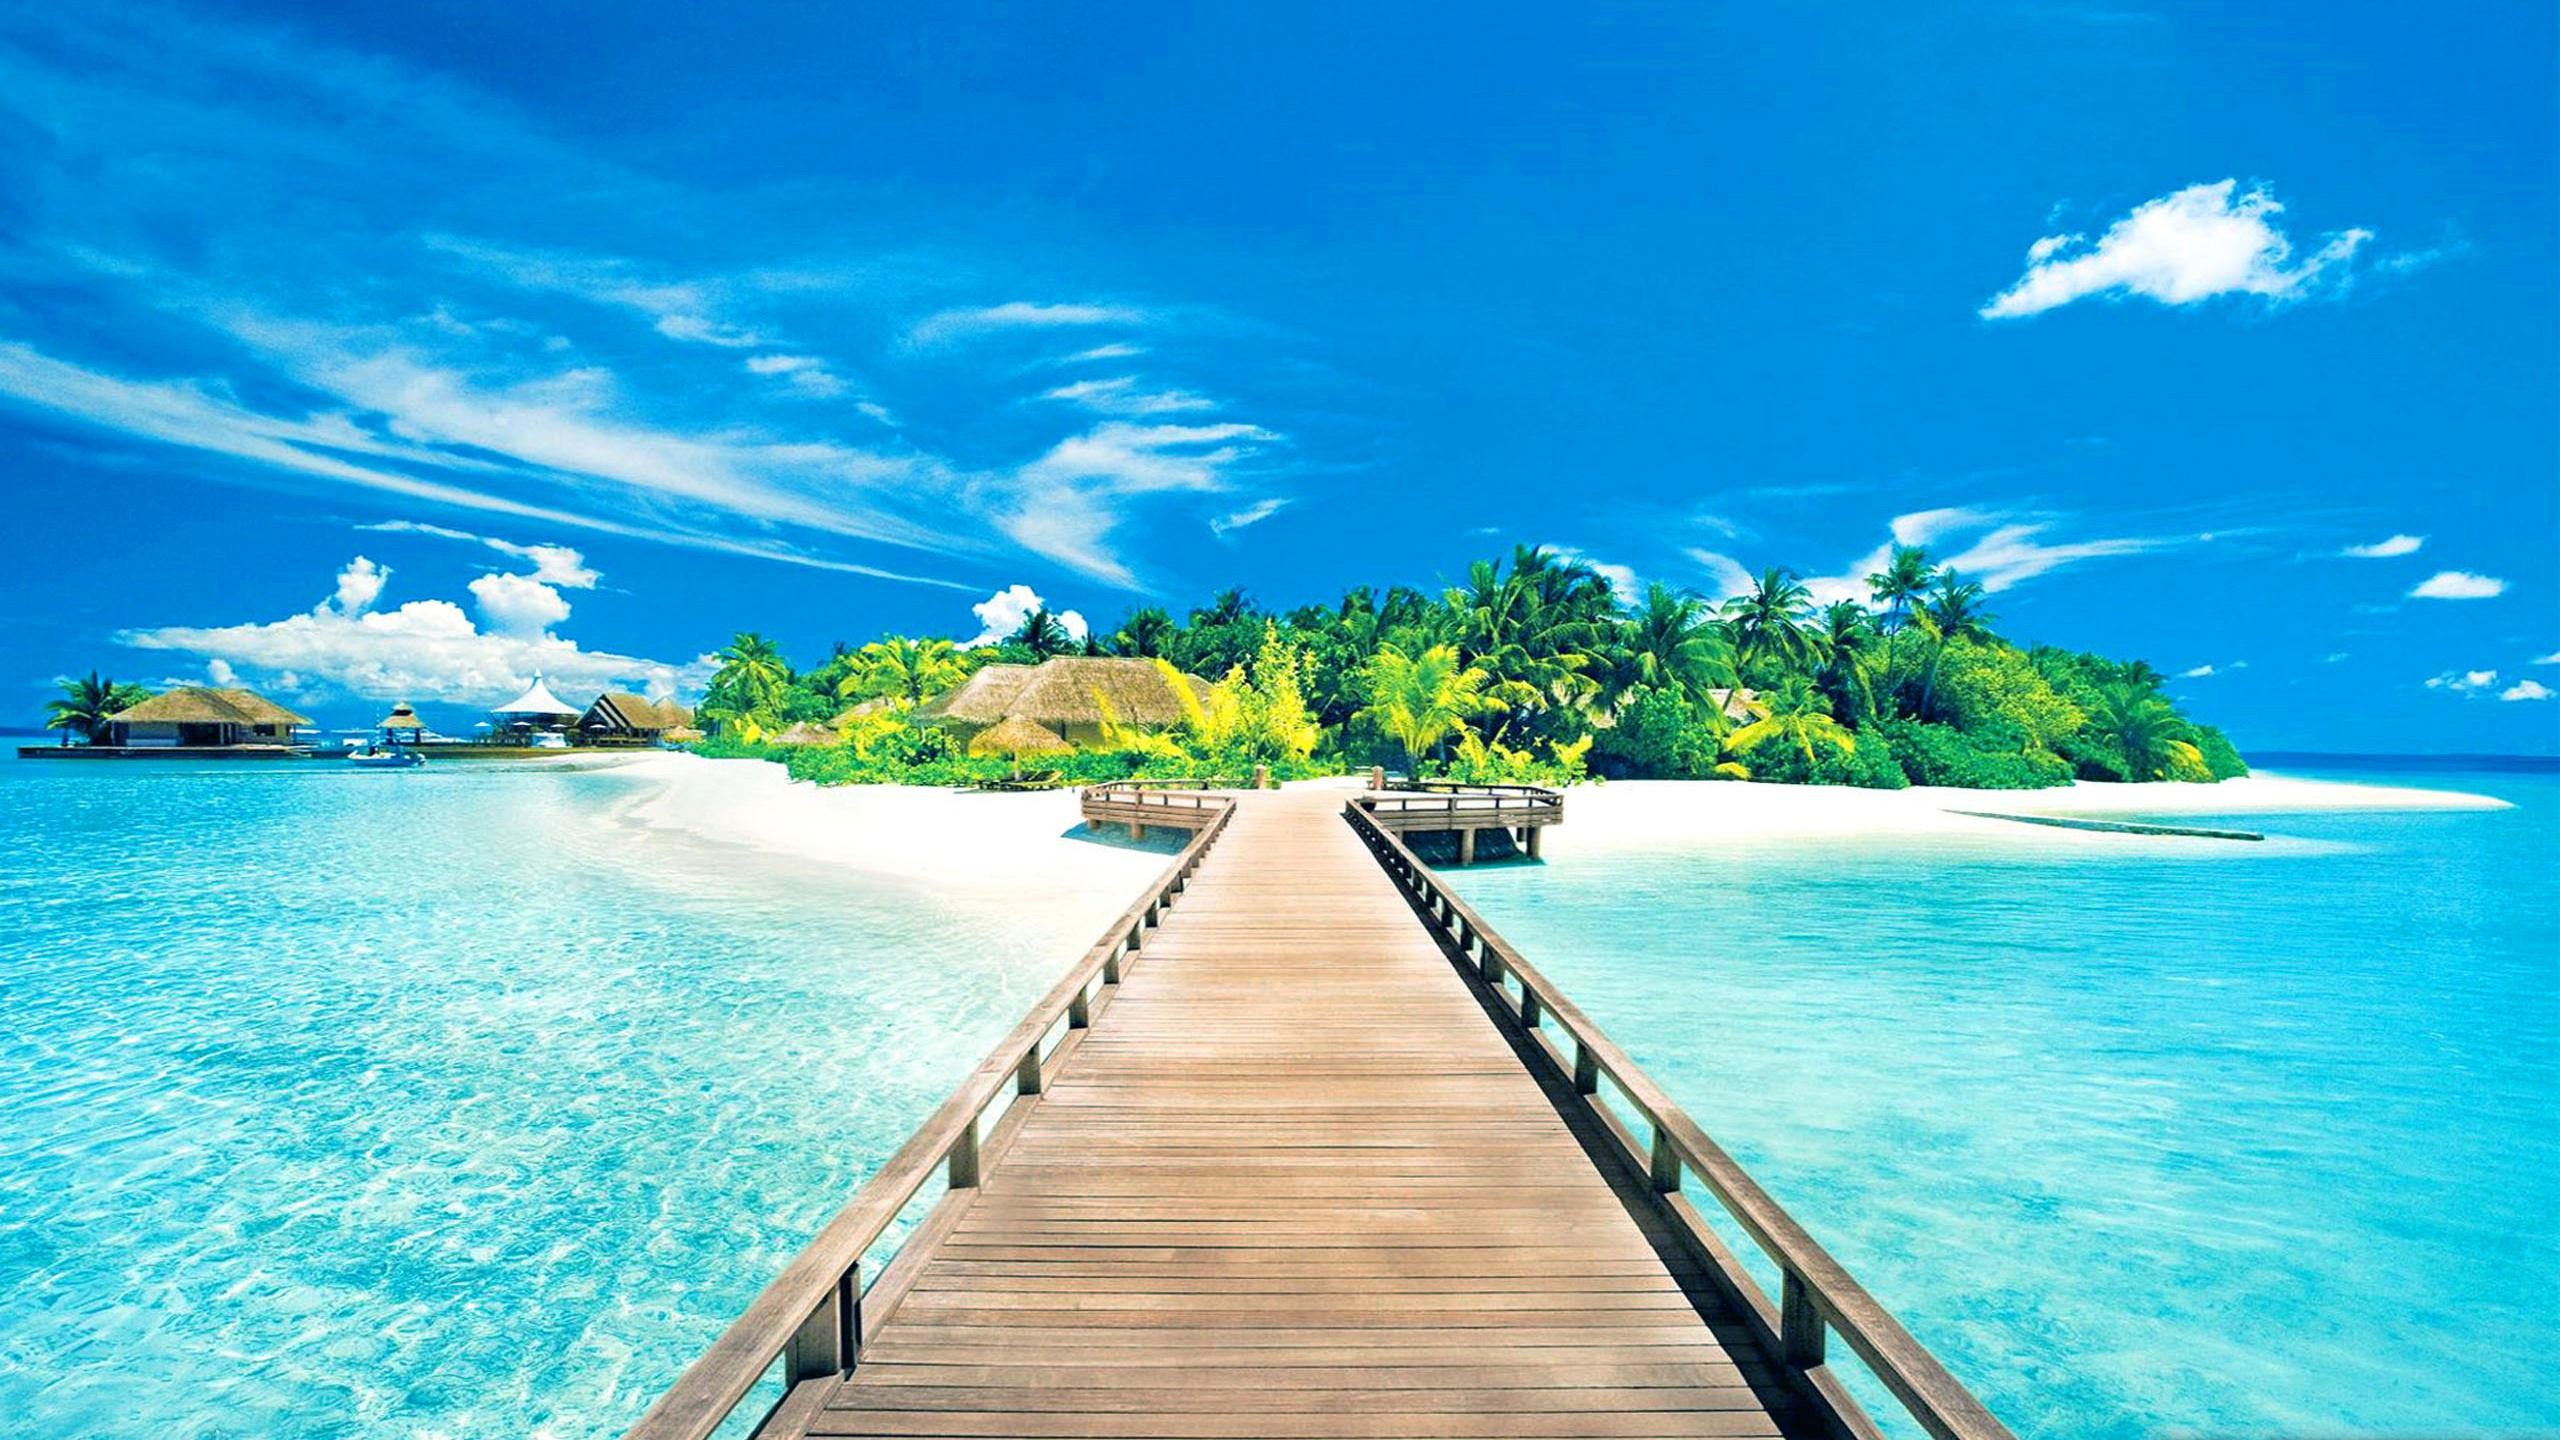 2560x1440 Beaches & Islands Stock Photos in High Quality HD Resolutions. Best  1920Ã1080 beach Wide Wallpapers For Desktop Background for any Computer,  Laptop, ...